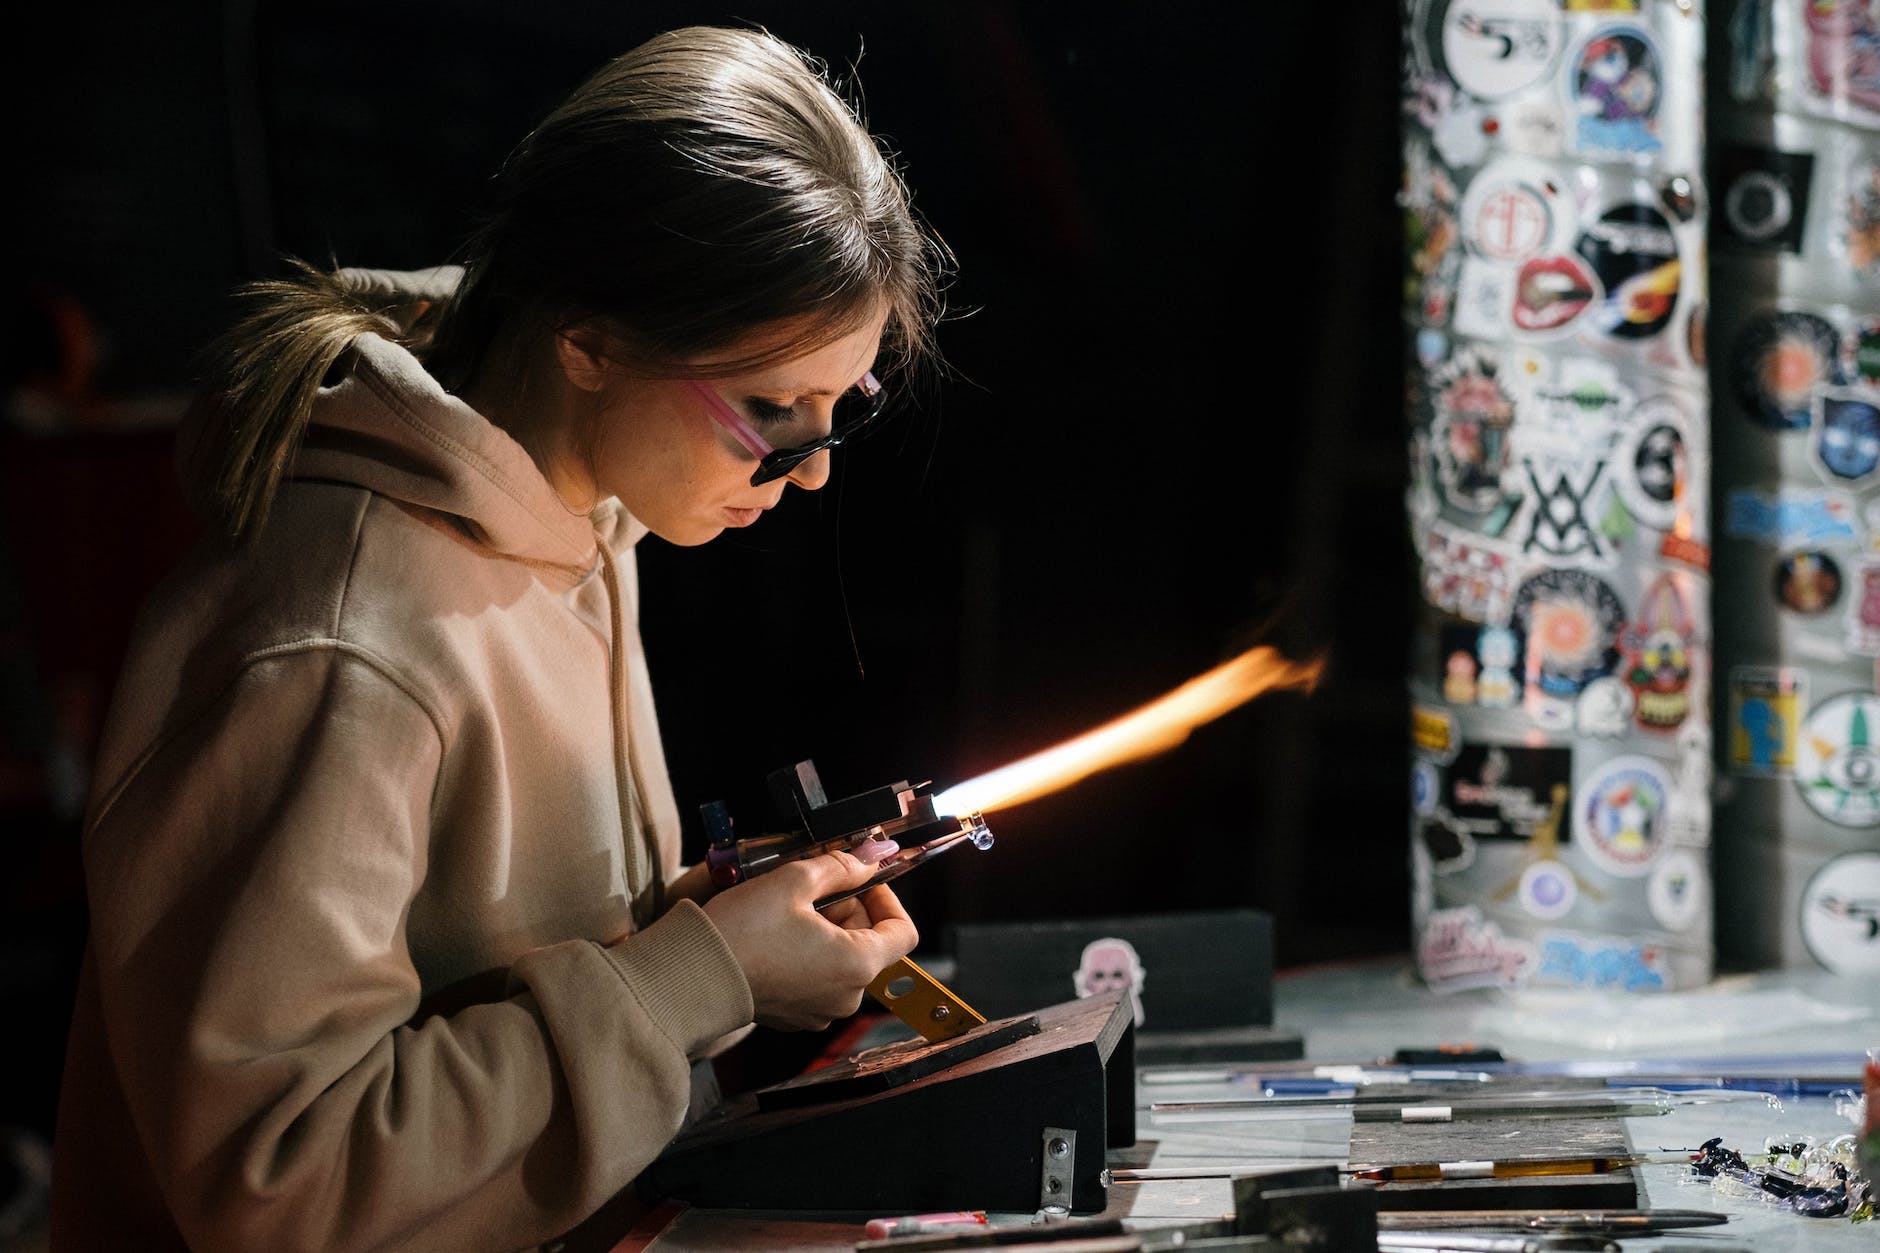 Glassblowing with Fire: Harnessing Heat for Artistic Expression